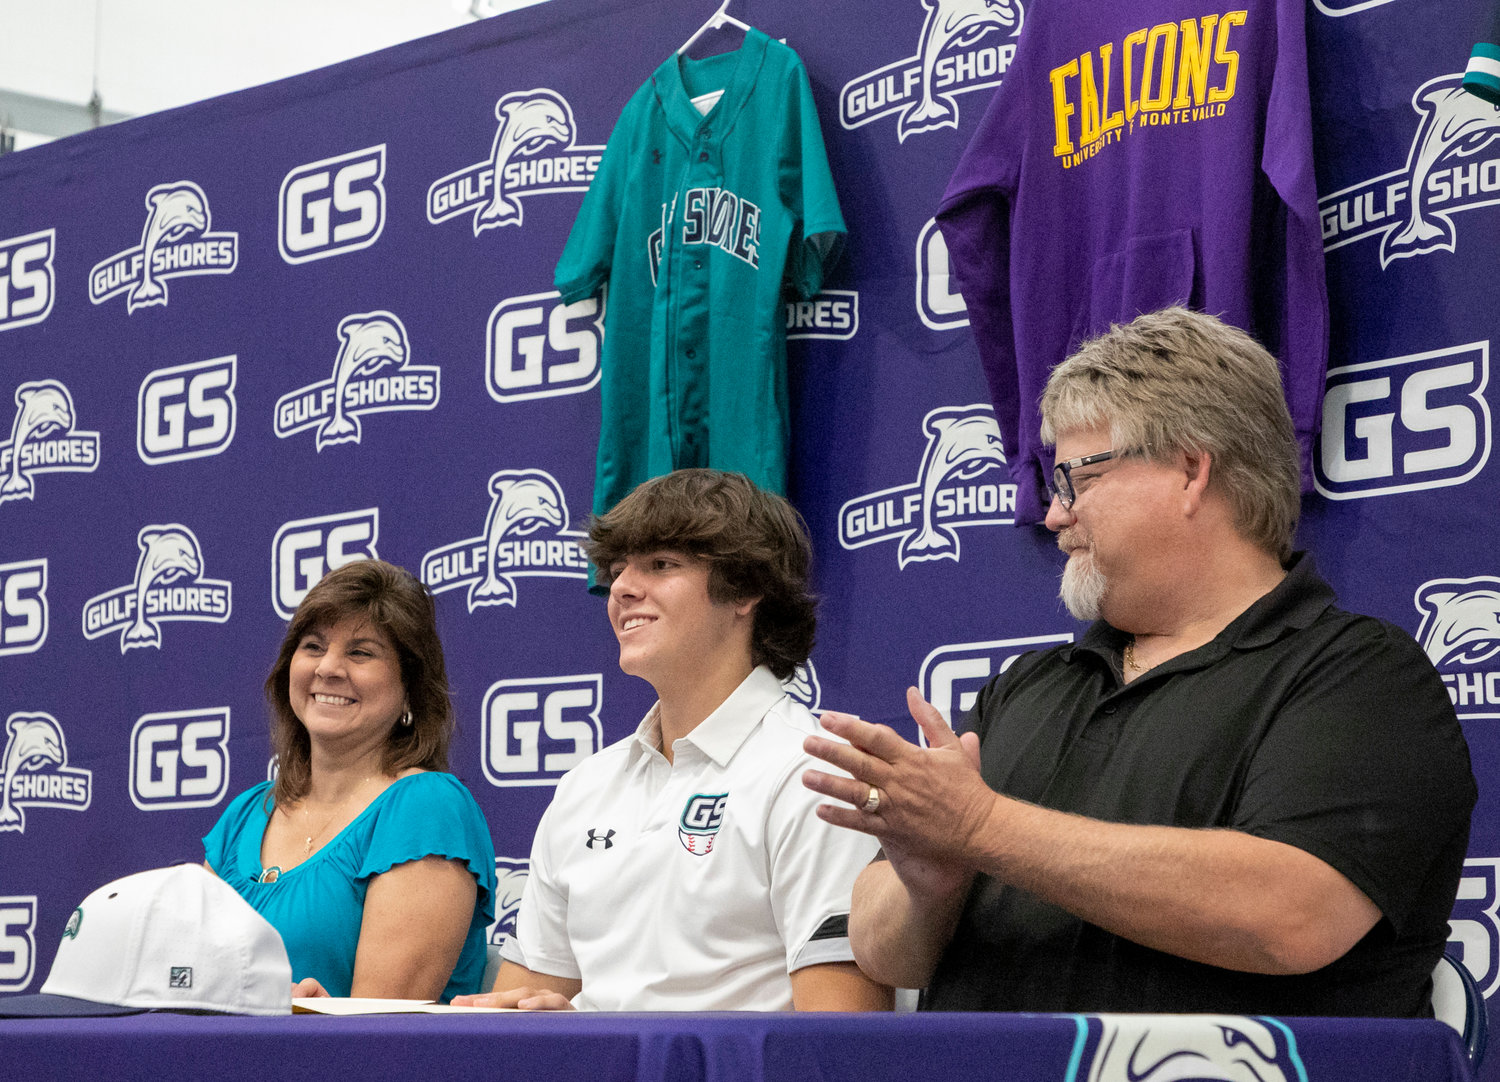 Dominic Maldet made his commitment to the University of Montevallo Falcons official Wednesday morning at Gulf Shores High School where he signed his National Letter of Intent between his parents. The Dolphins catcher will be searching for a third consecutive Class 6A Area 2 title before he leaves.